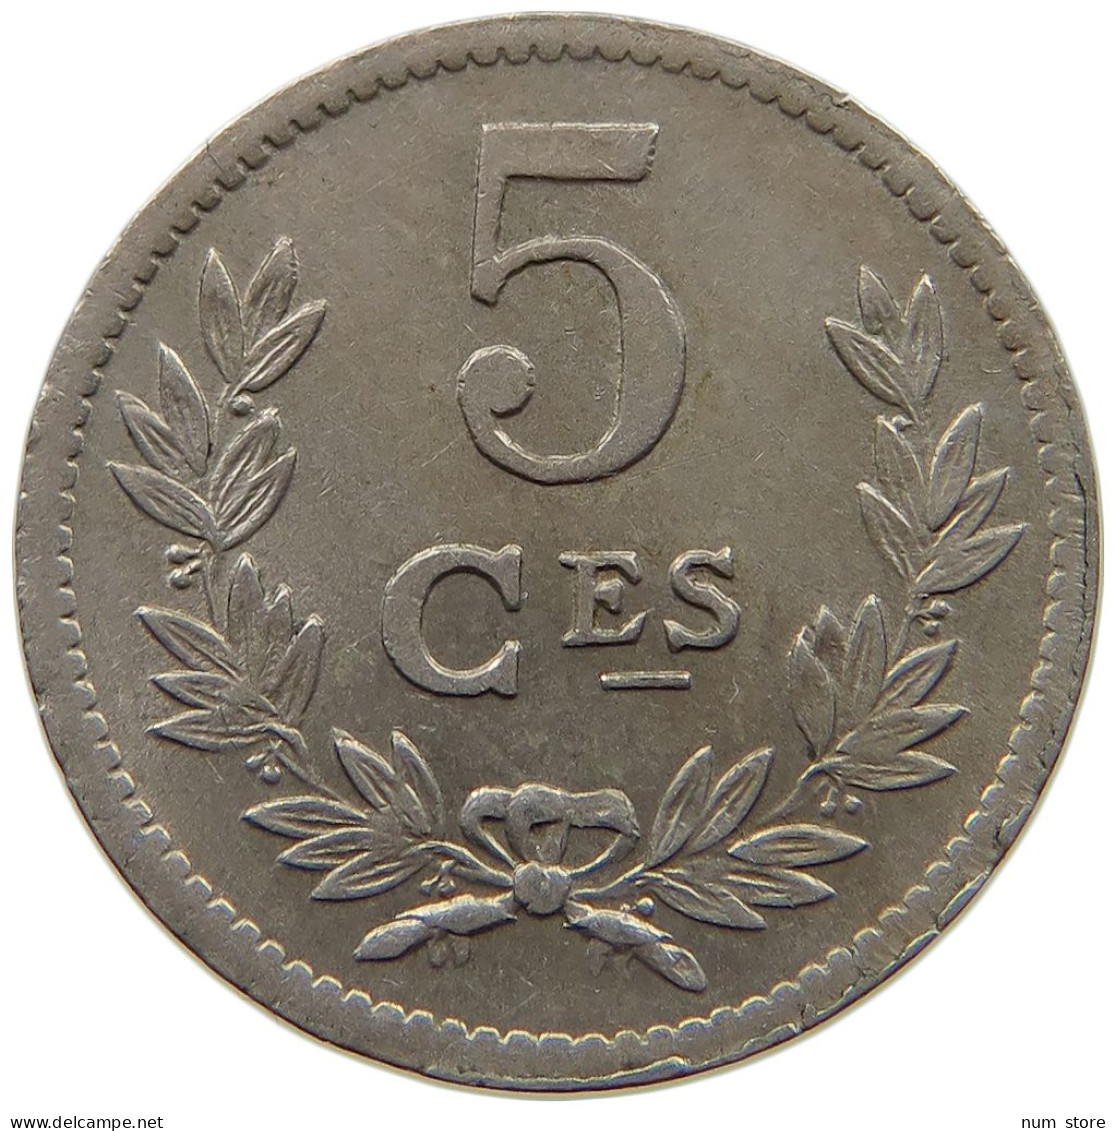 LUXEMBOURG 5 CENTIMES 1924 Charlotte (1919-1964) #a089 0385 - Luxembourg